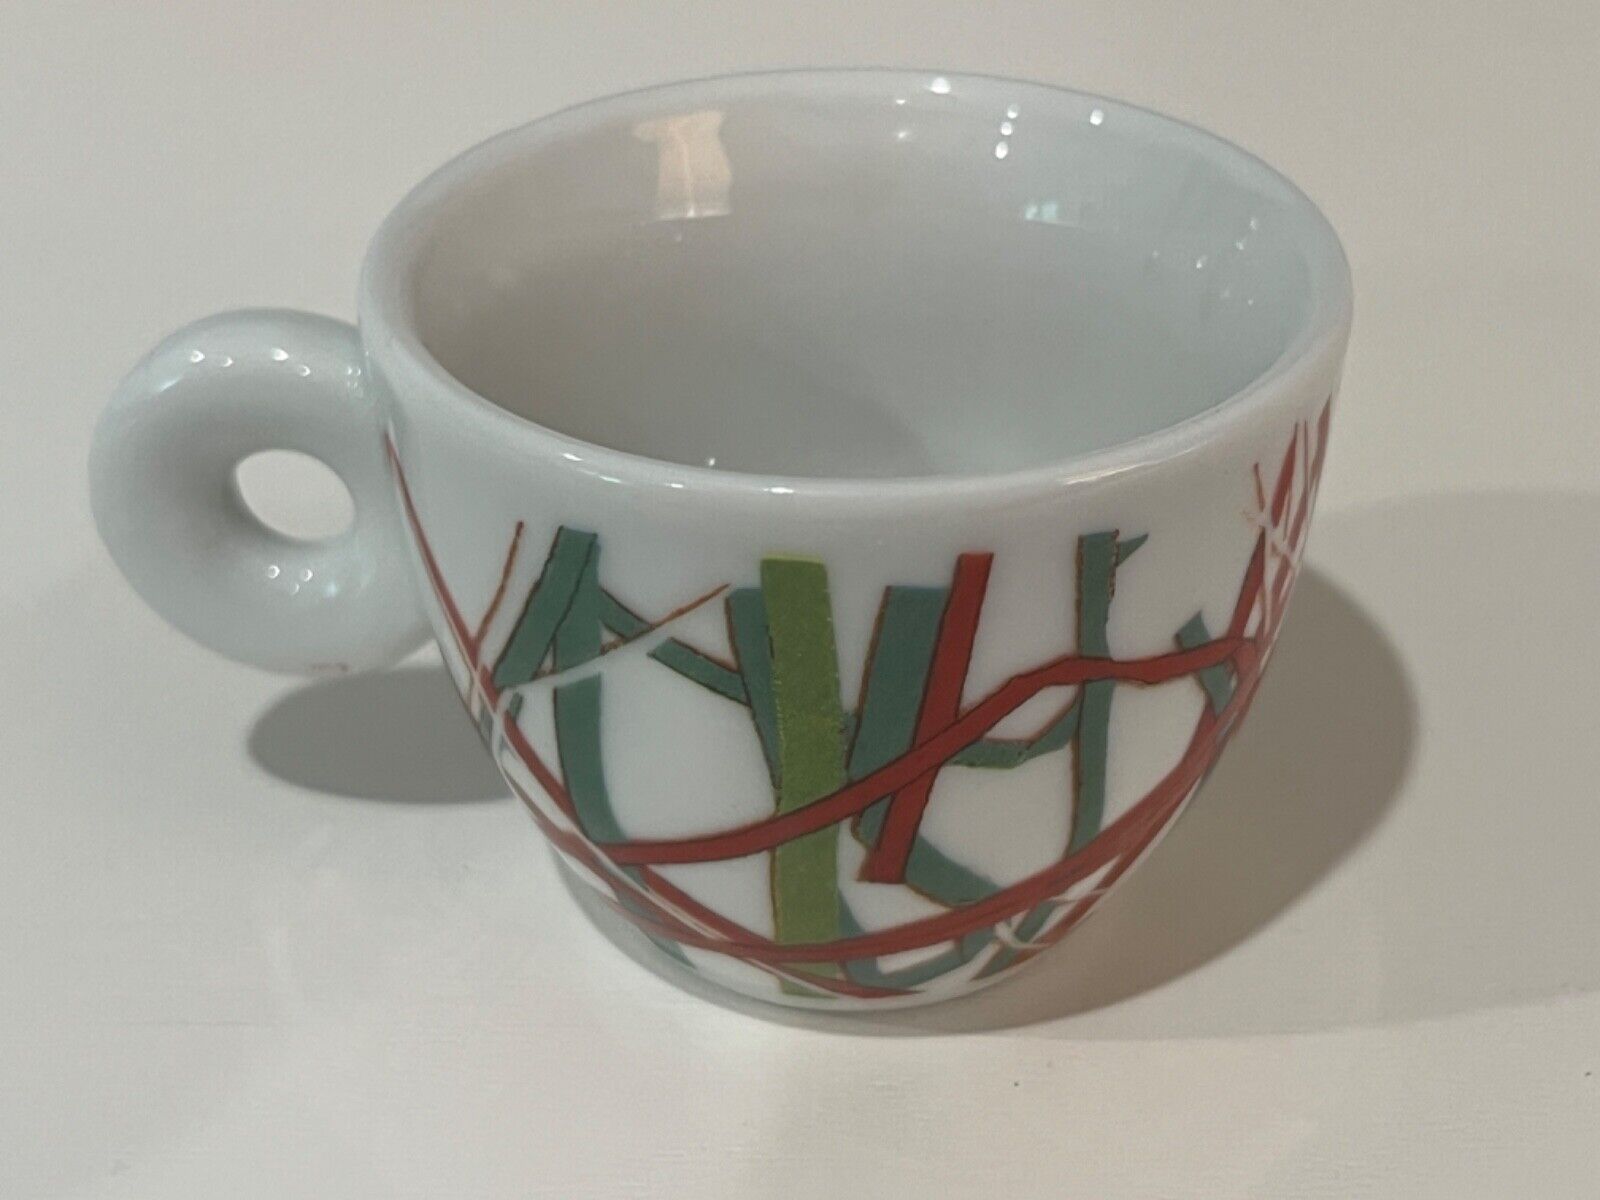 Illy Art Collection 1996 Espresso Cup by James Rosenquist Numbered Edition